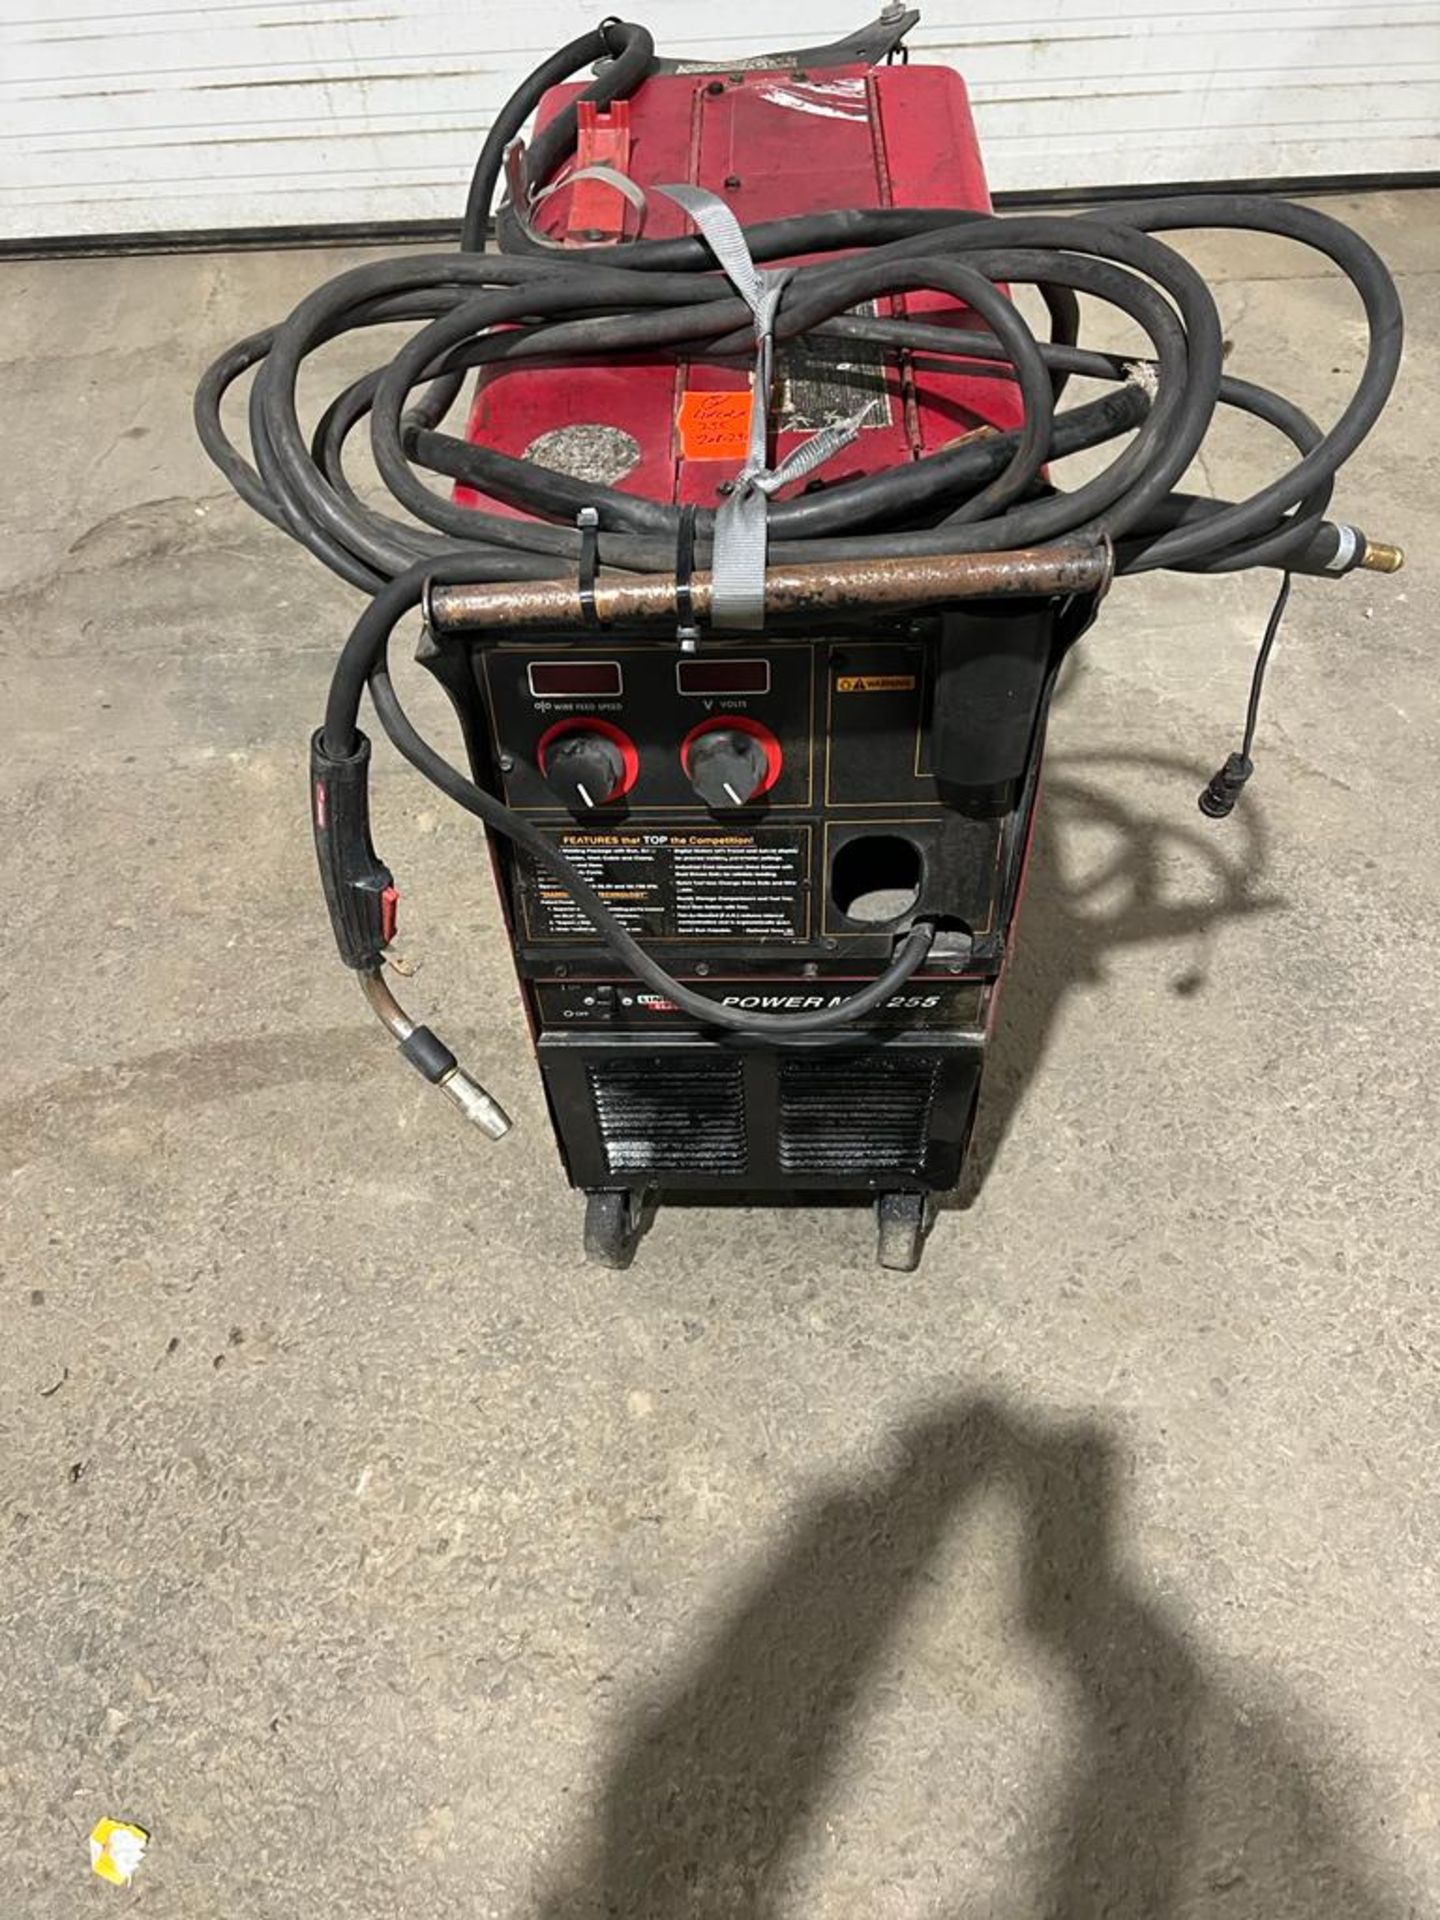 Lincoln Power Mig 255 Mig Welder with Built in Wire Feeder and gun 208/230V COMPLETE - Image 3 of 4